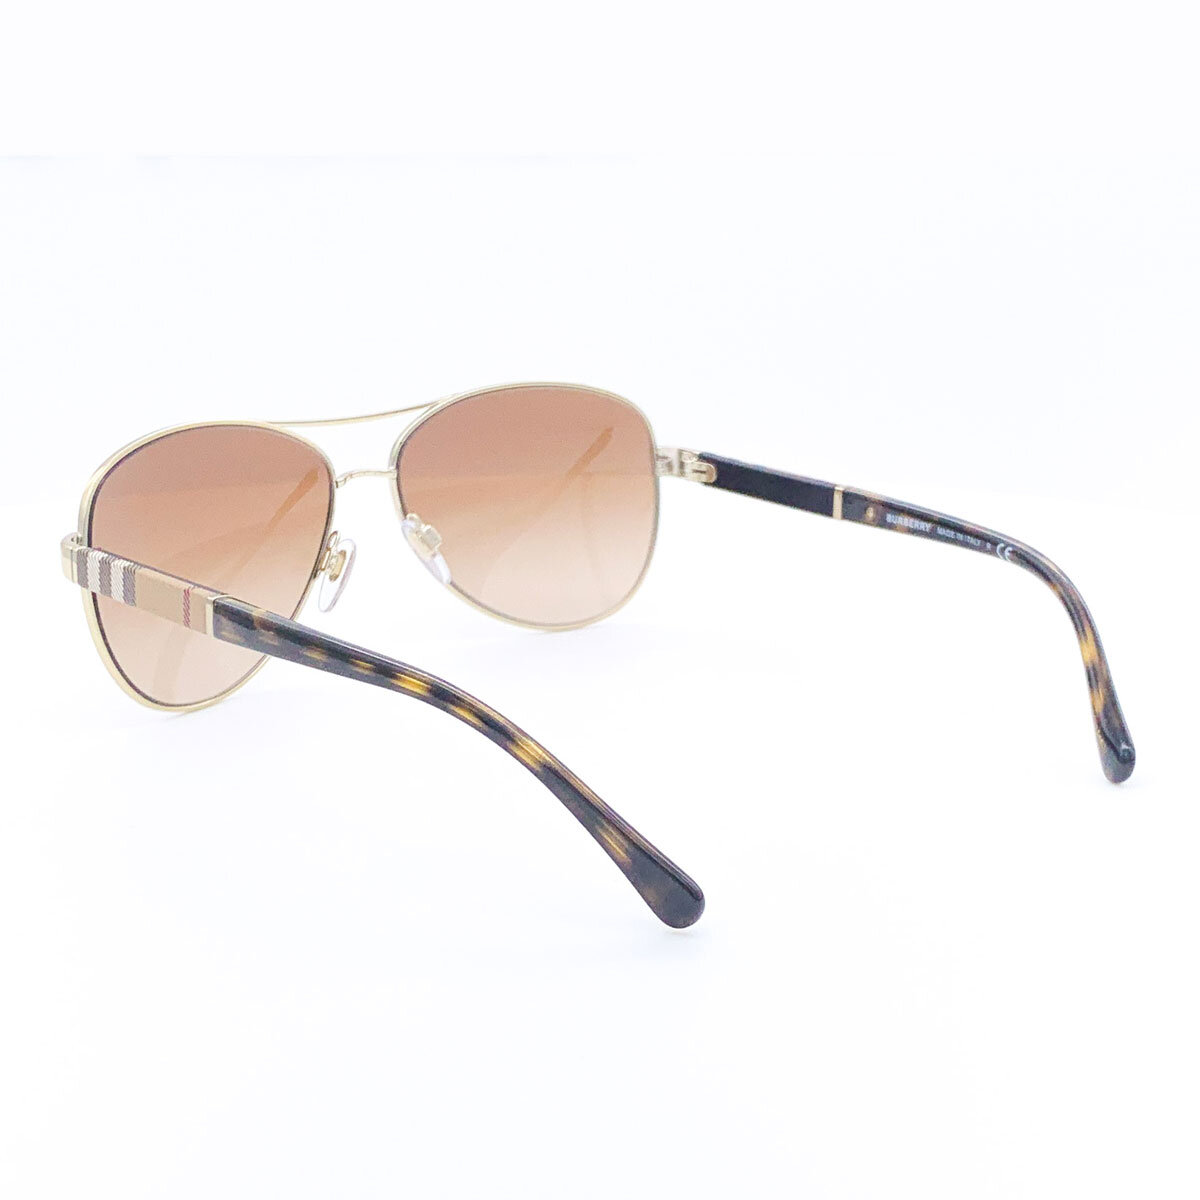 Burberry Gold Aviator Sunglasses with Brown Lenses, BE3080 114513